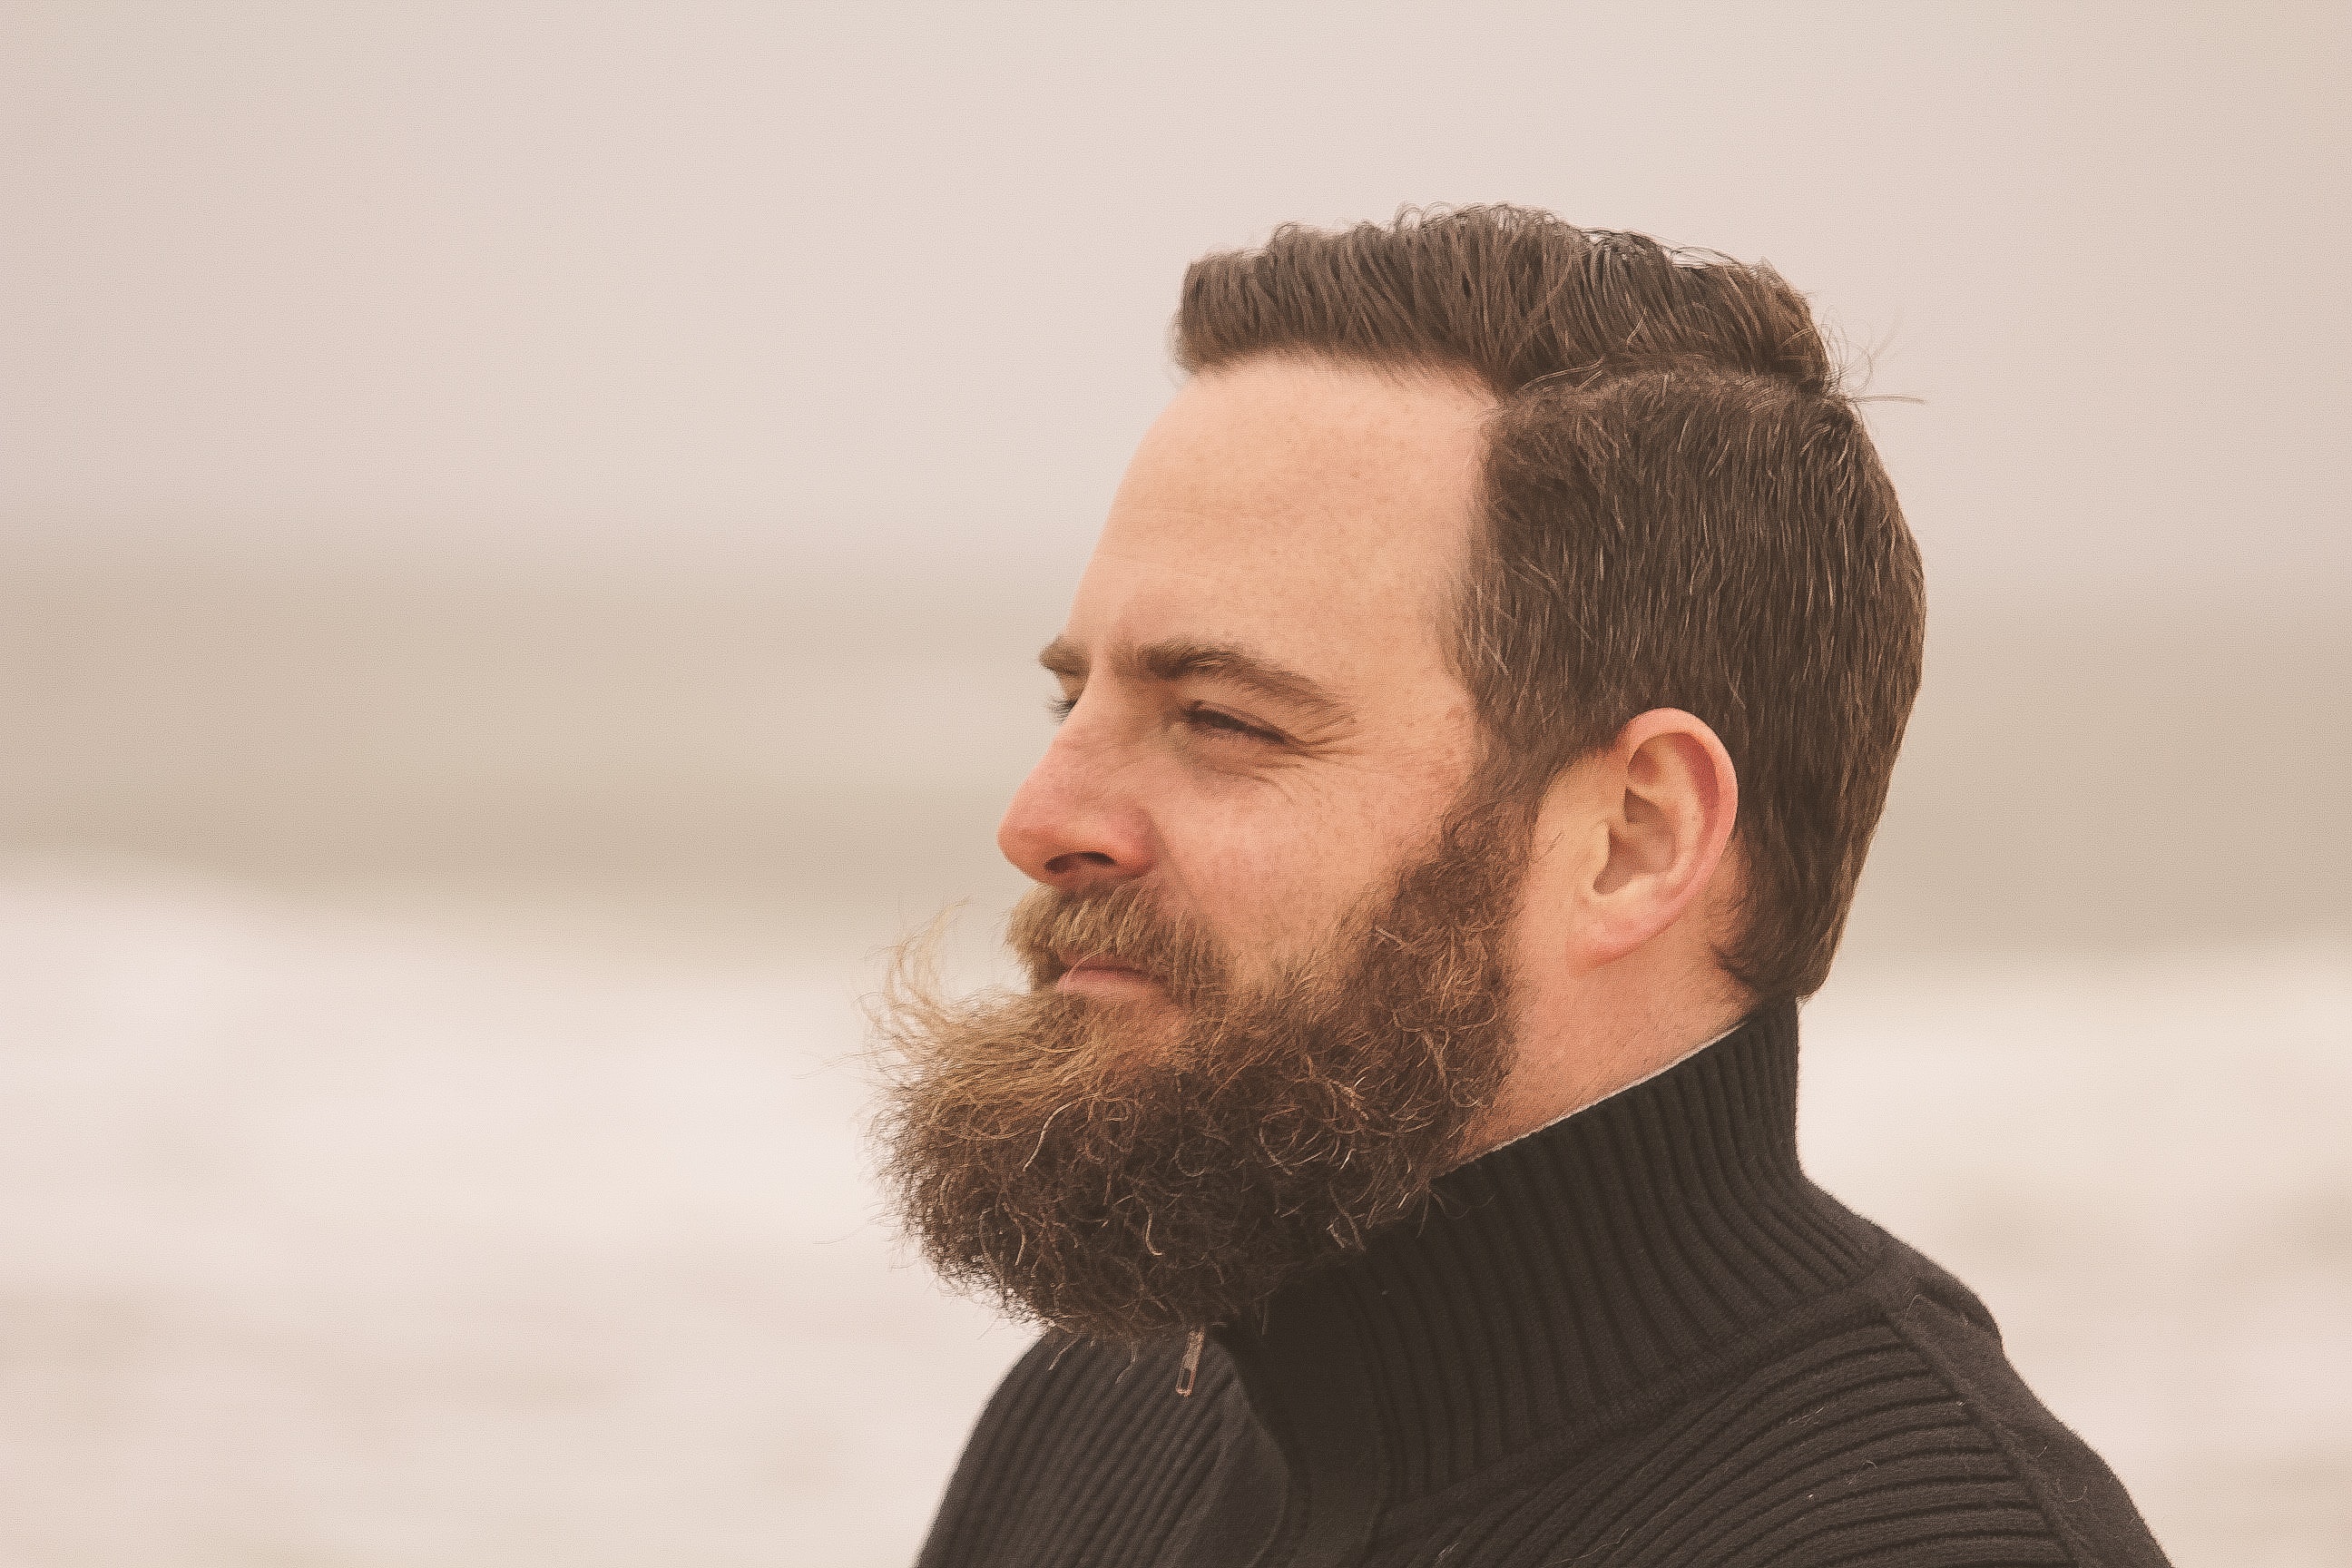 Free photo: Depth of Field Photography of Man in Black Turtle Neck Top ...